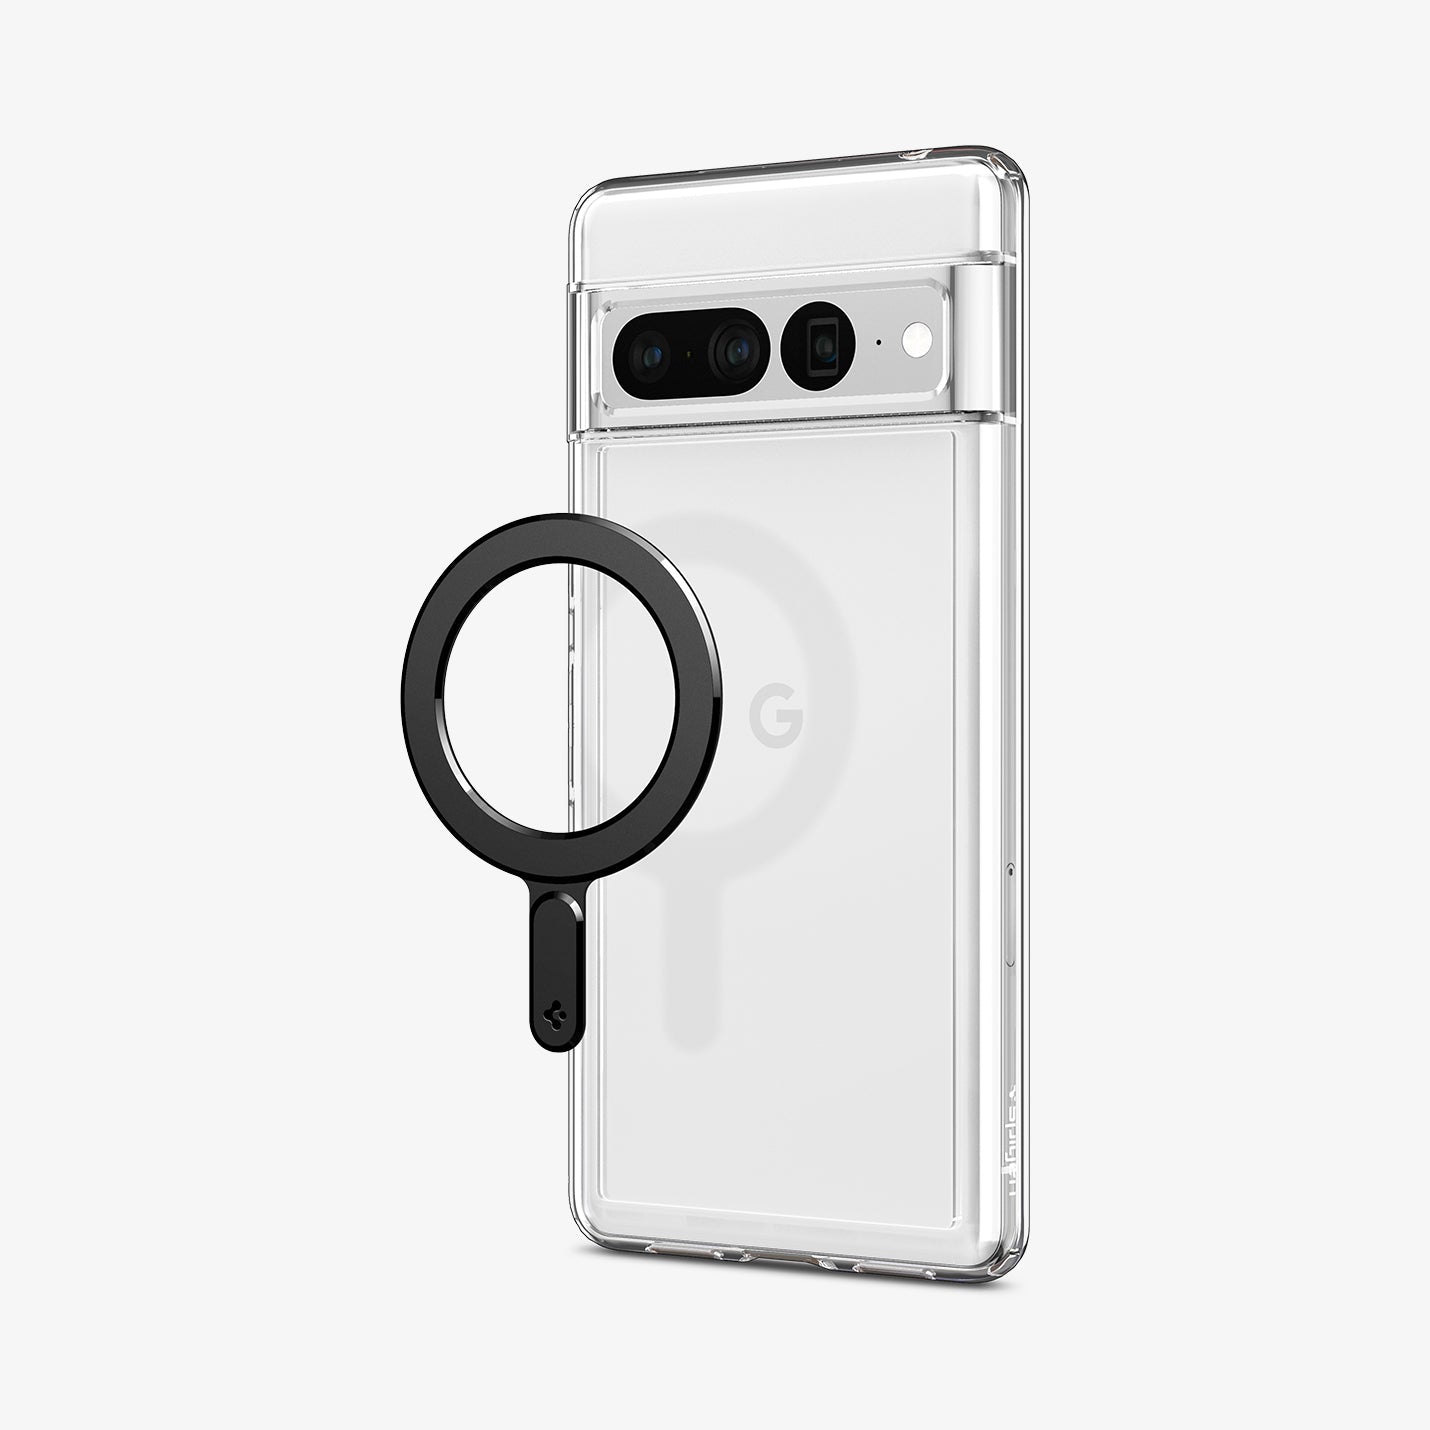 ACP06106 - Magnet Ring Plate (MagFit) in black showing the ring plate hovering away from back of device